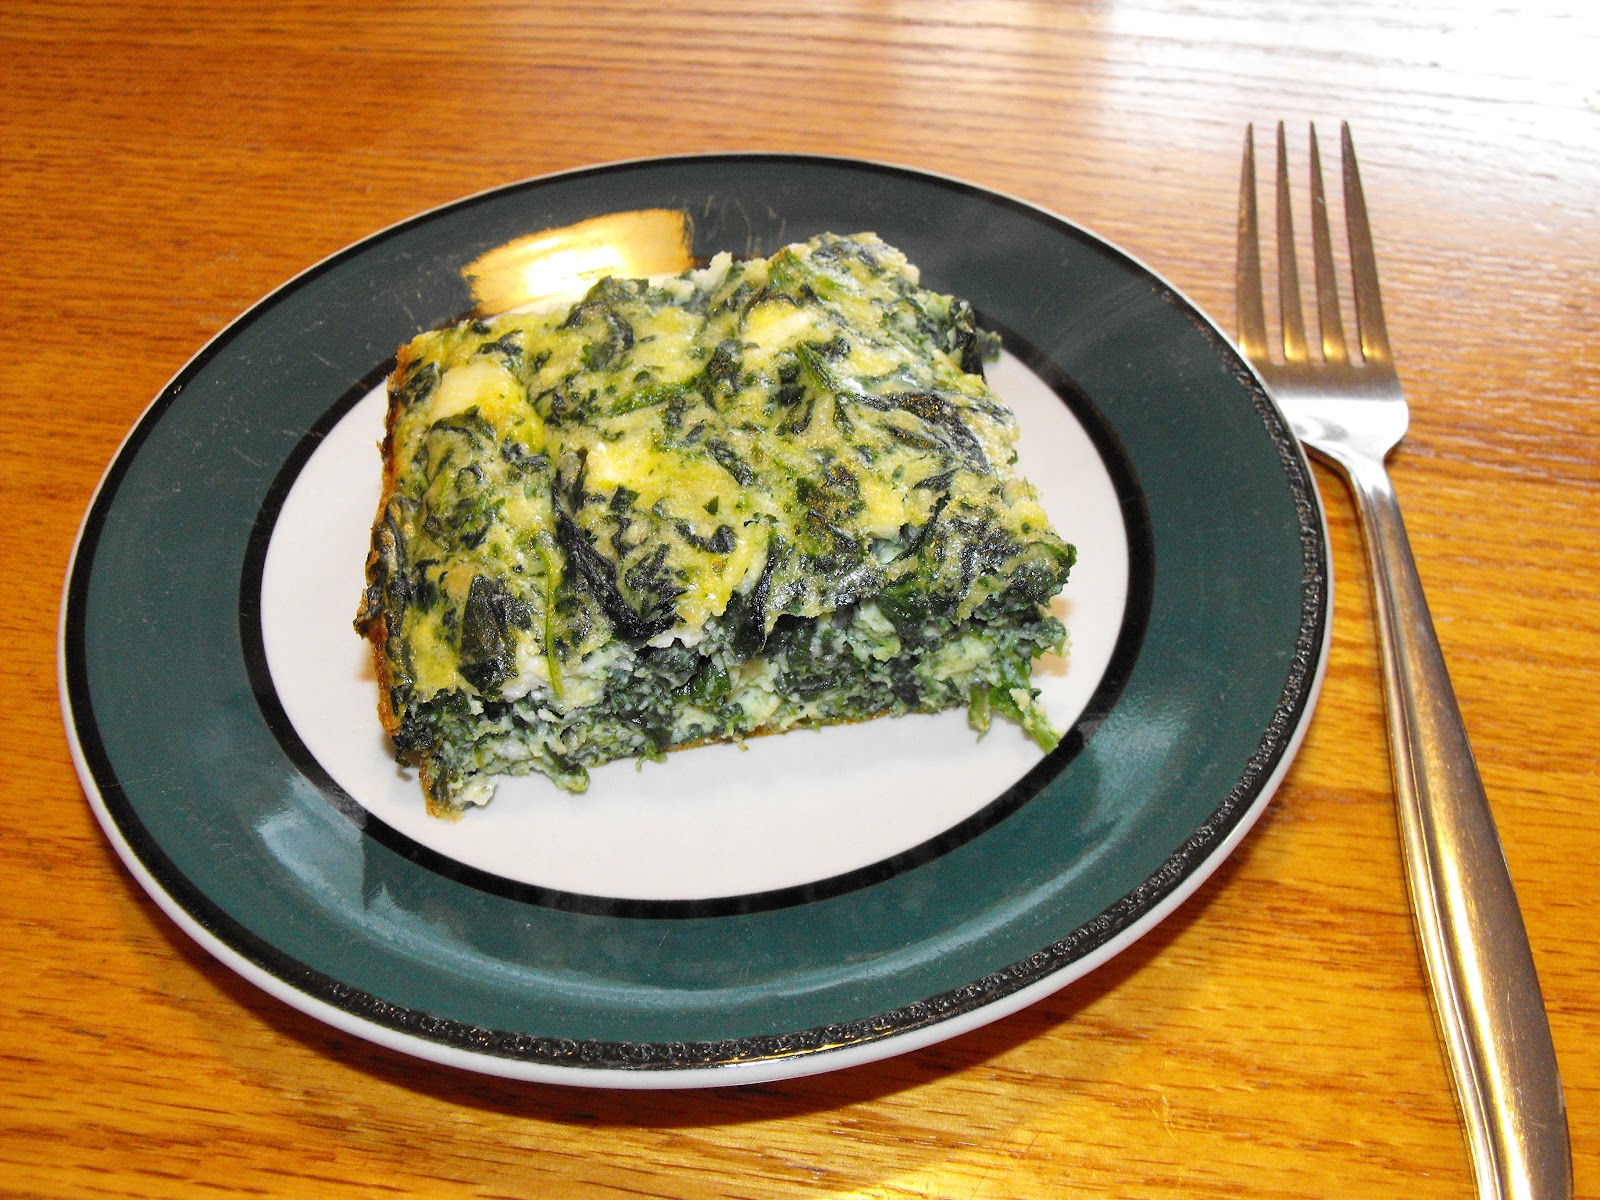 This Spinach Feta Egg Bake is truly an ultimate breakfast! Filled with